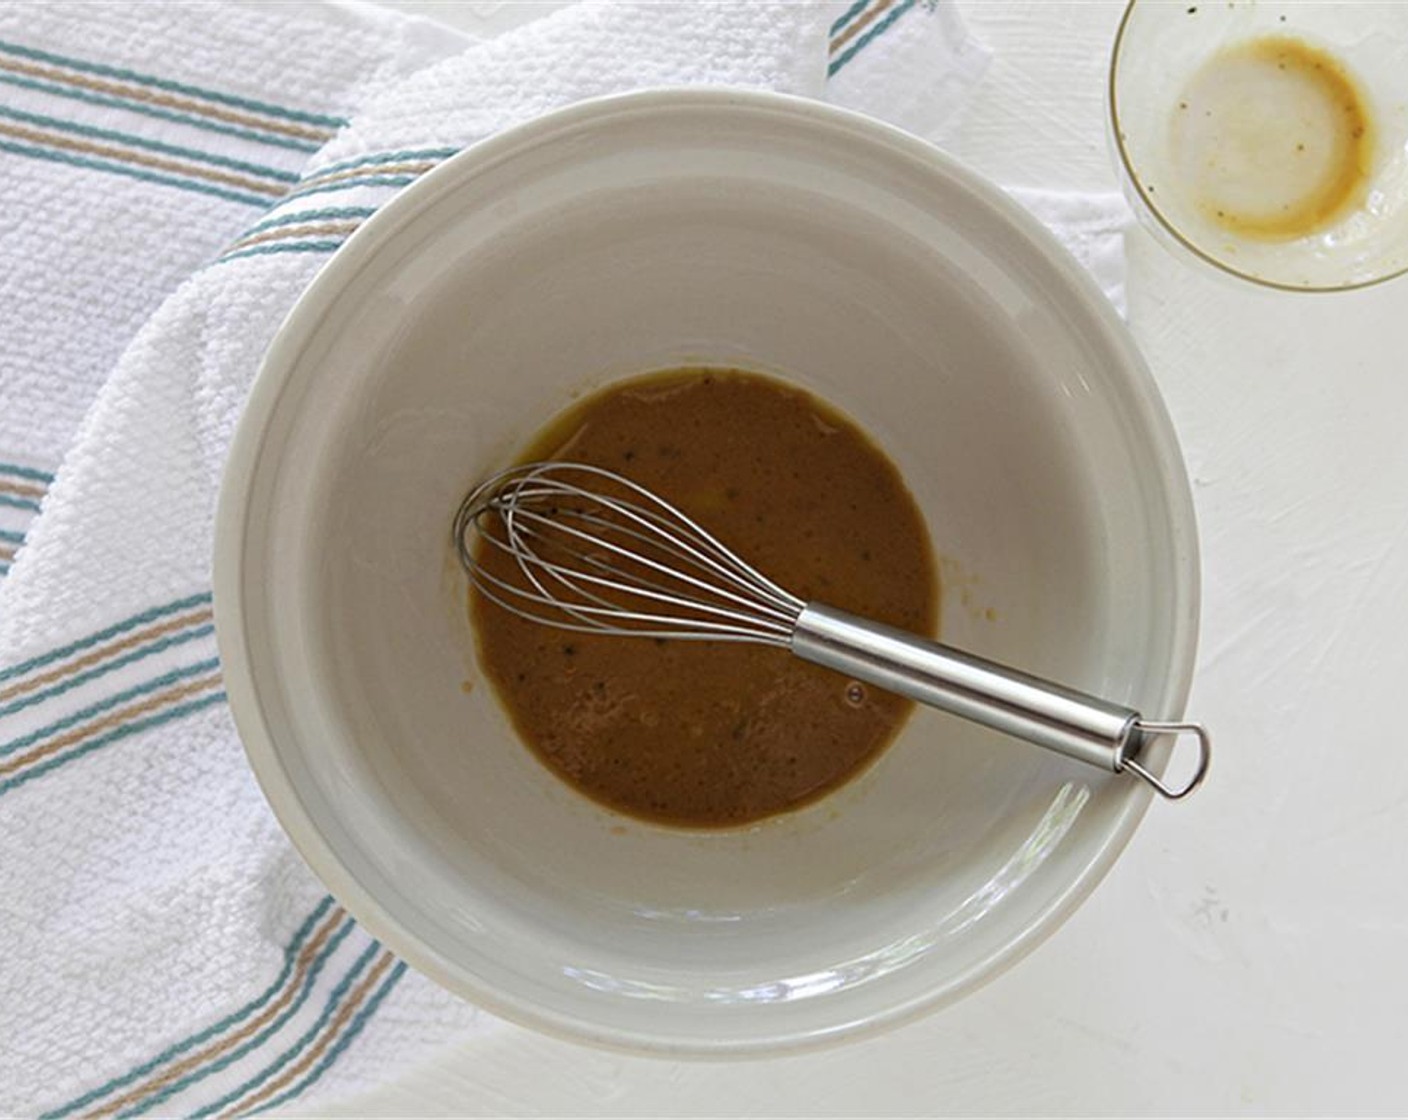 step 6 In the reserved mixing bowl, combine Dijon Mustard (1 tsp), Sherry Vinegar (1/2 Tbsp), Honey (1 tsp), and a pinch of salt and pepper. Mix to combine and slowly add in remaining Extra-Virgin Olive Oil (1 Tbsp) while whisking.